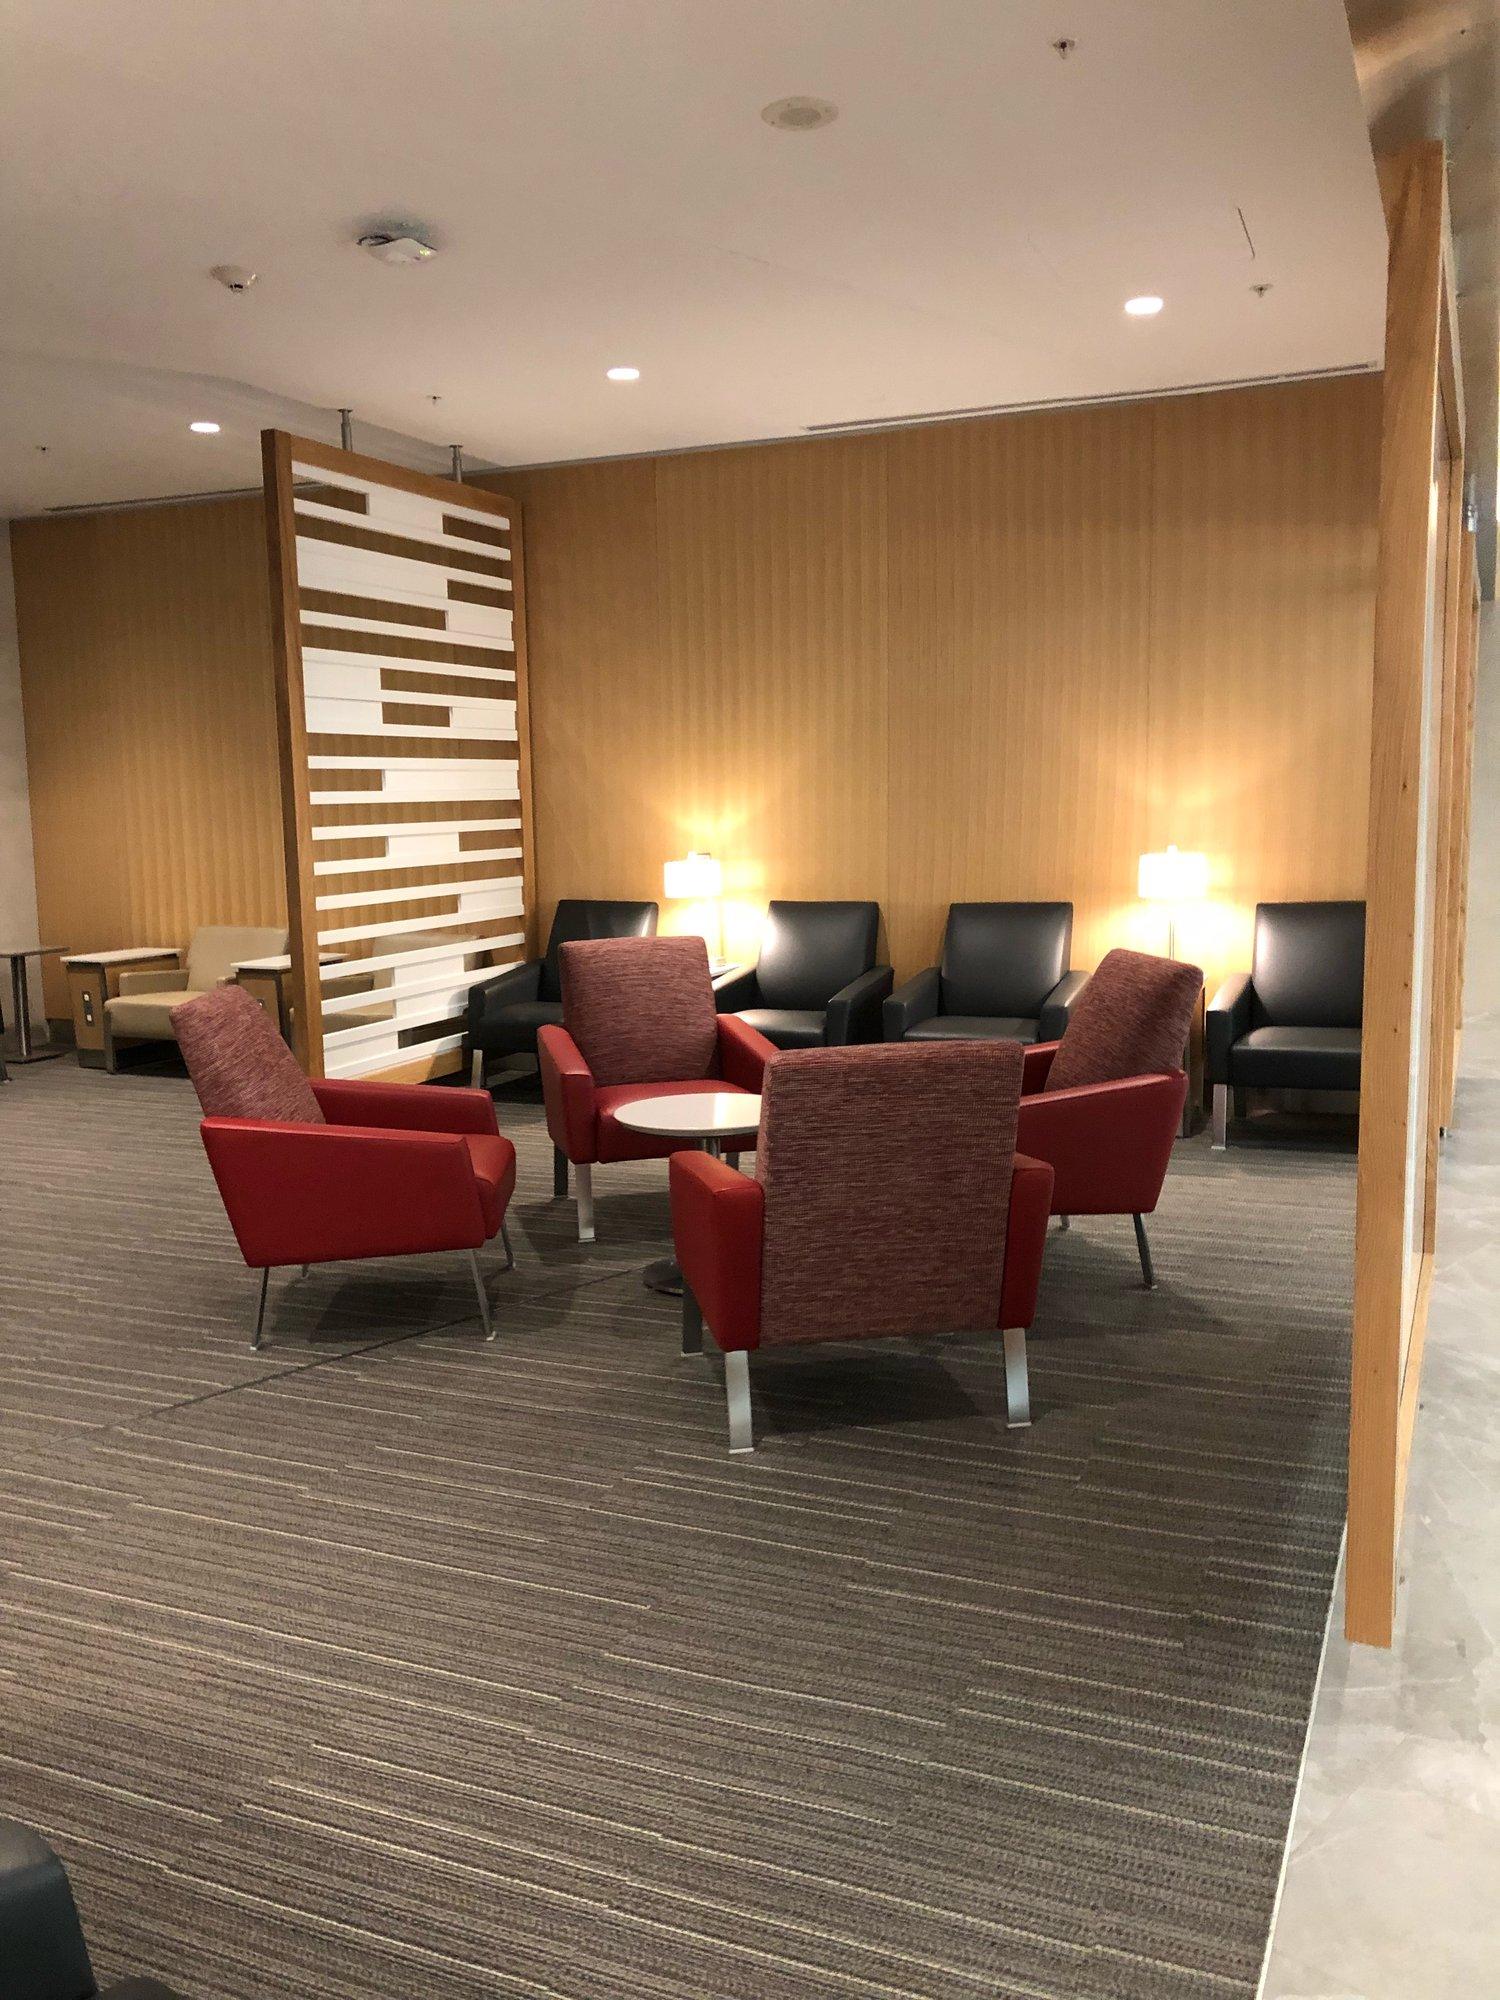 American Airlines Flagship Lounge image 59 of 65